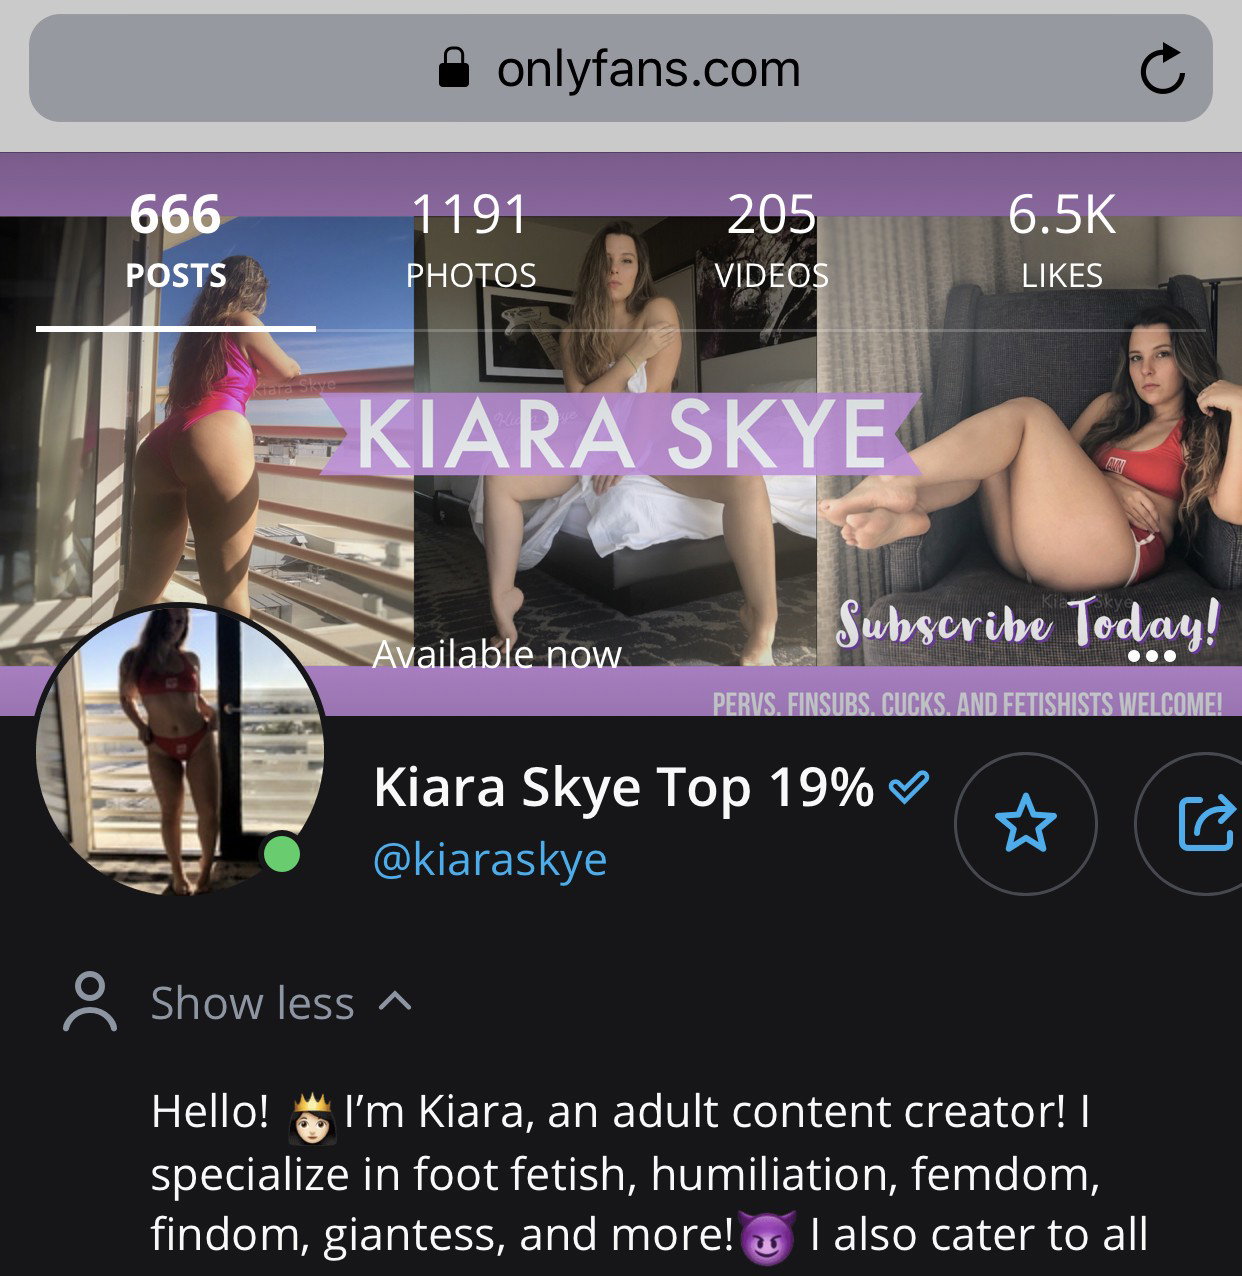 Photo by Kiara Skye with the username @KiaraSkye, who is a star user,  March 27, 2020 at 6:10 PM. The post is about the topic OnlyFans Verified Models and the text says '💸 Just reduced my OnlyFans price during this crazy time! Let me distract you!👸🏻

👉 https://kiarafans.com

#findom #femdom #onlyfans #fansite #quarantine #chill #feet #footfetish #amateur #cheap #curvy #thick #coronavirus #ass #tits #'